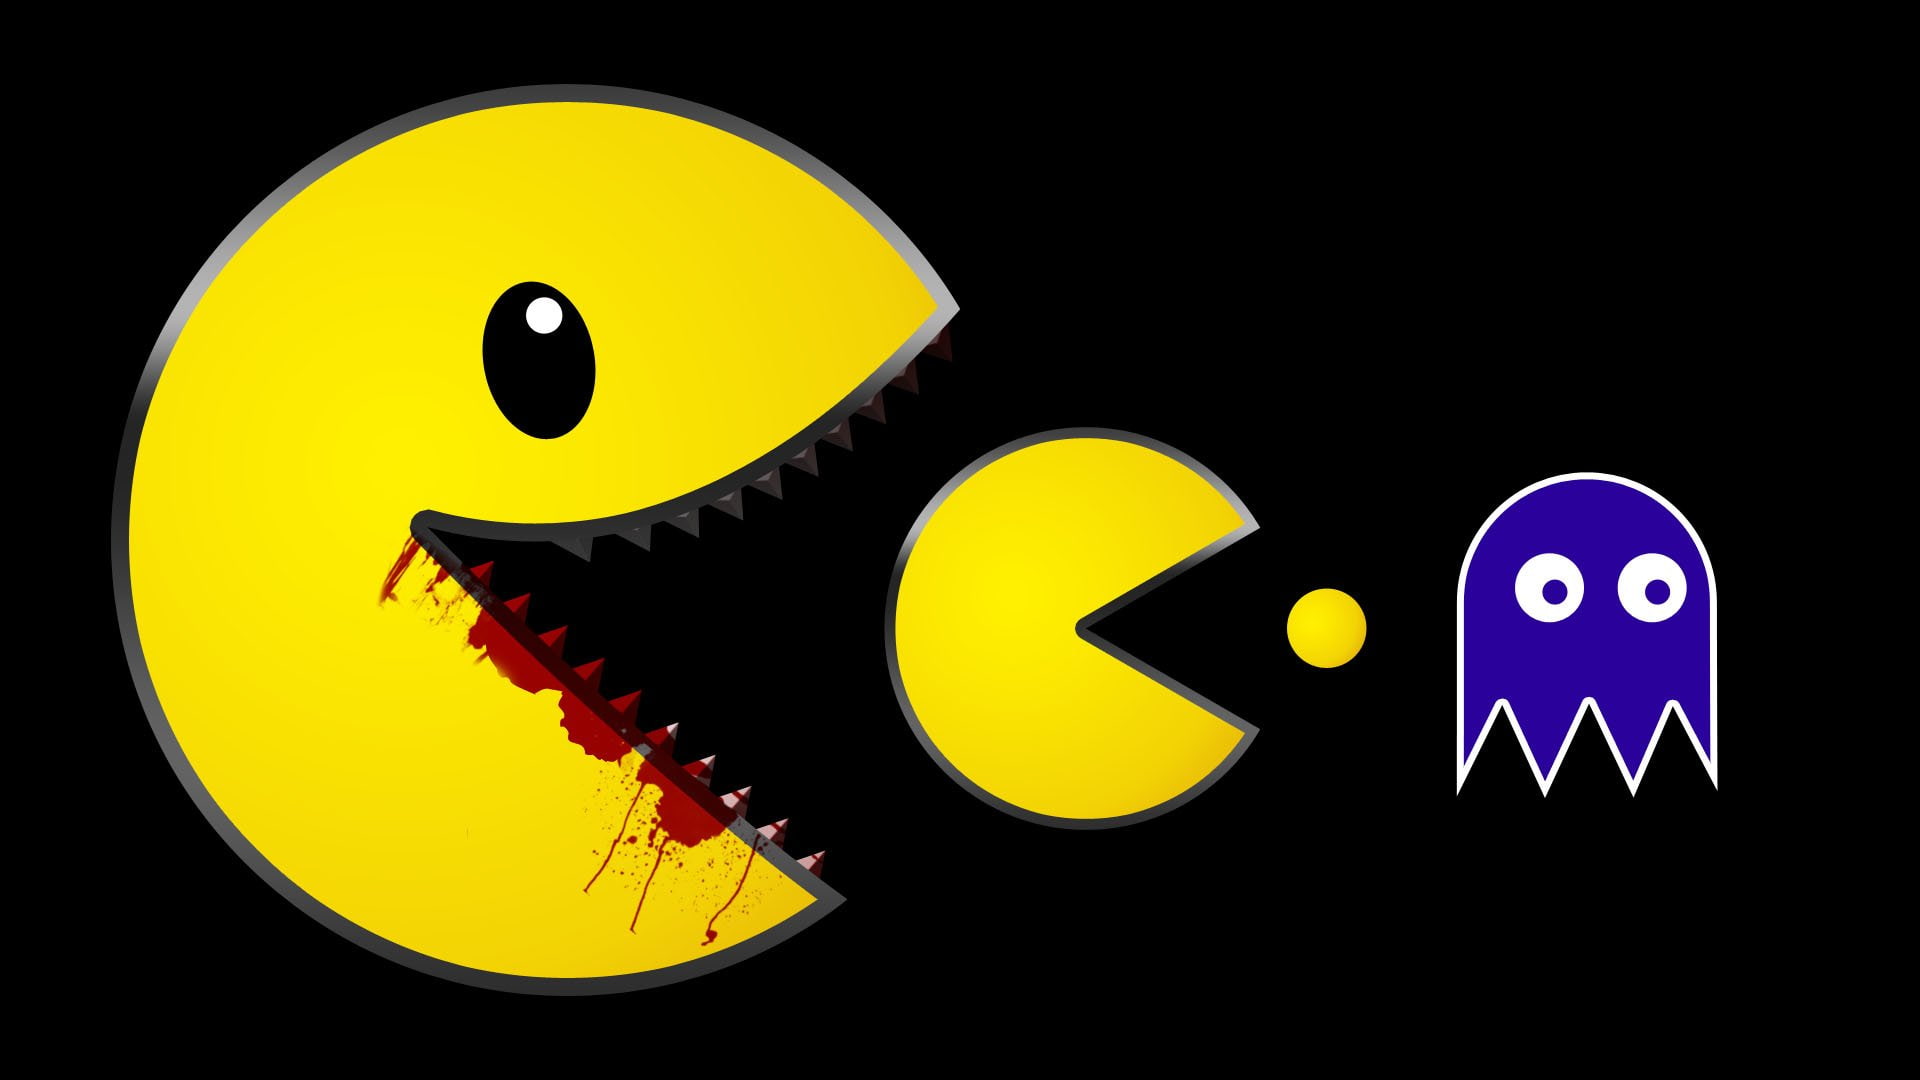 Pac-Man, communication, black background, yellow, music, arts culture and entertainment